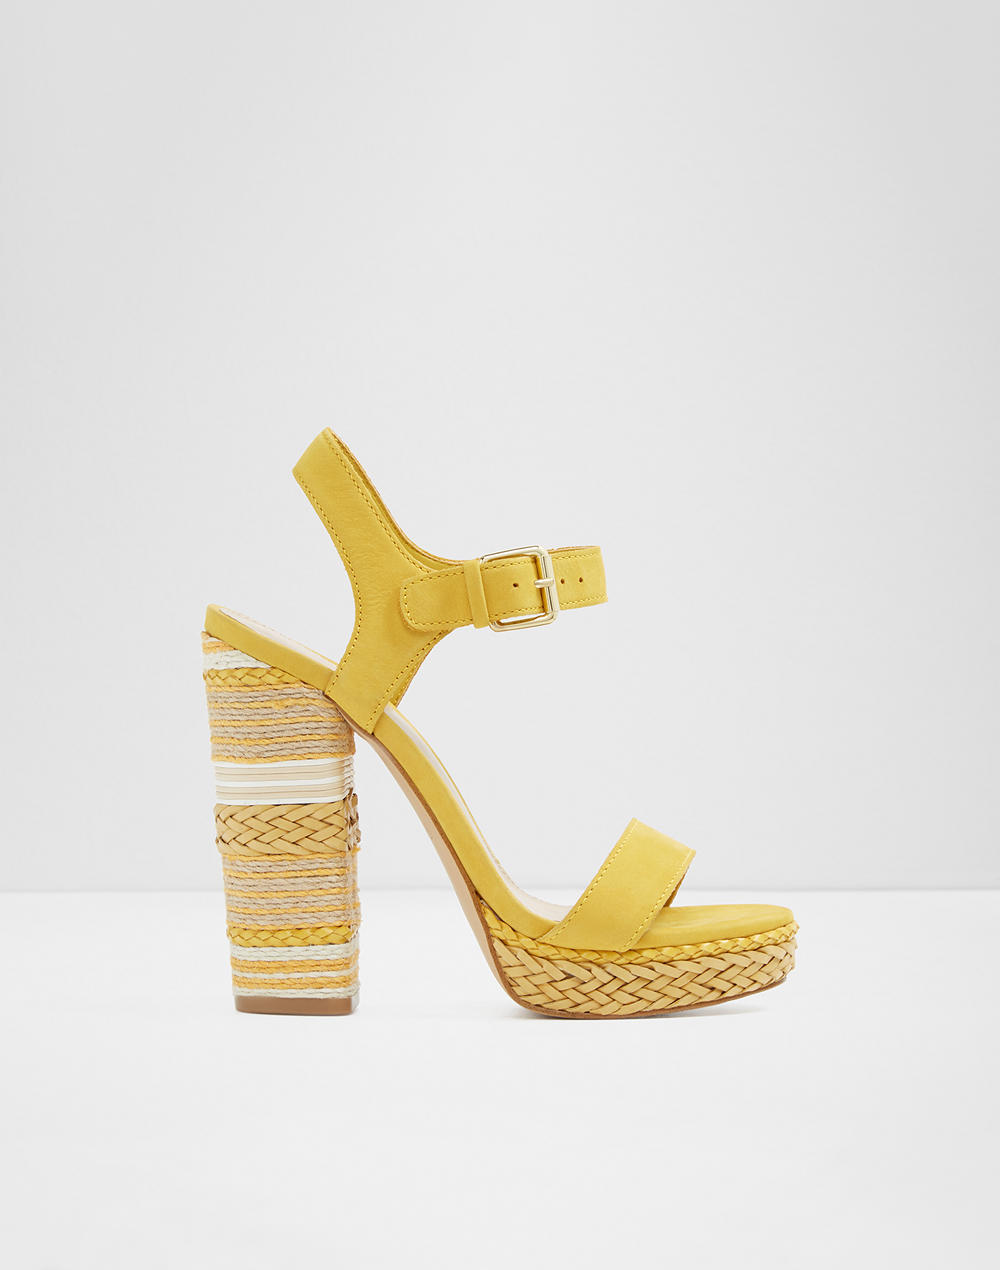 Clearance sandals for women | ALDO Canada